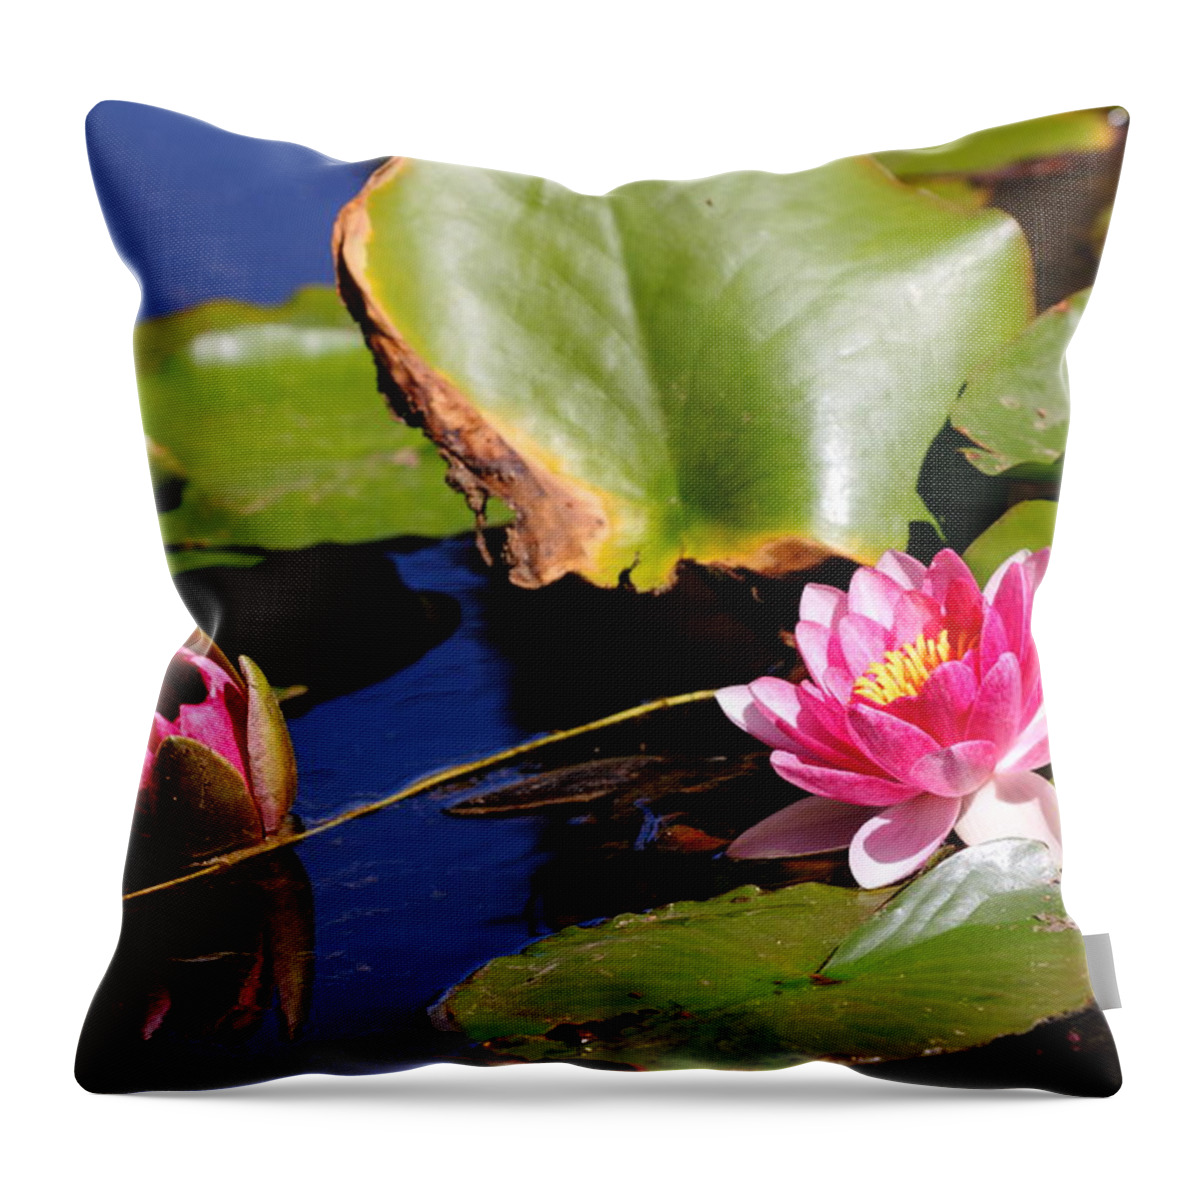 Lilies Throw Pillow featuring the photograph Two Lilies by Richard Patmore